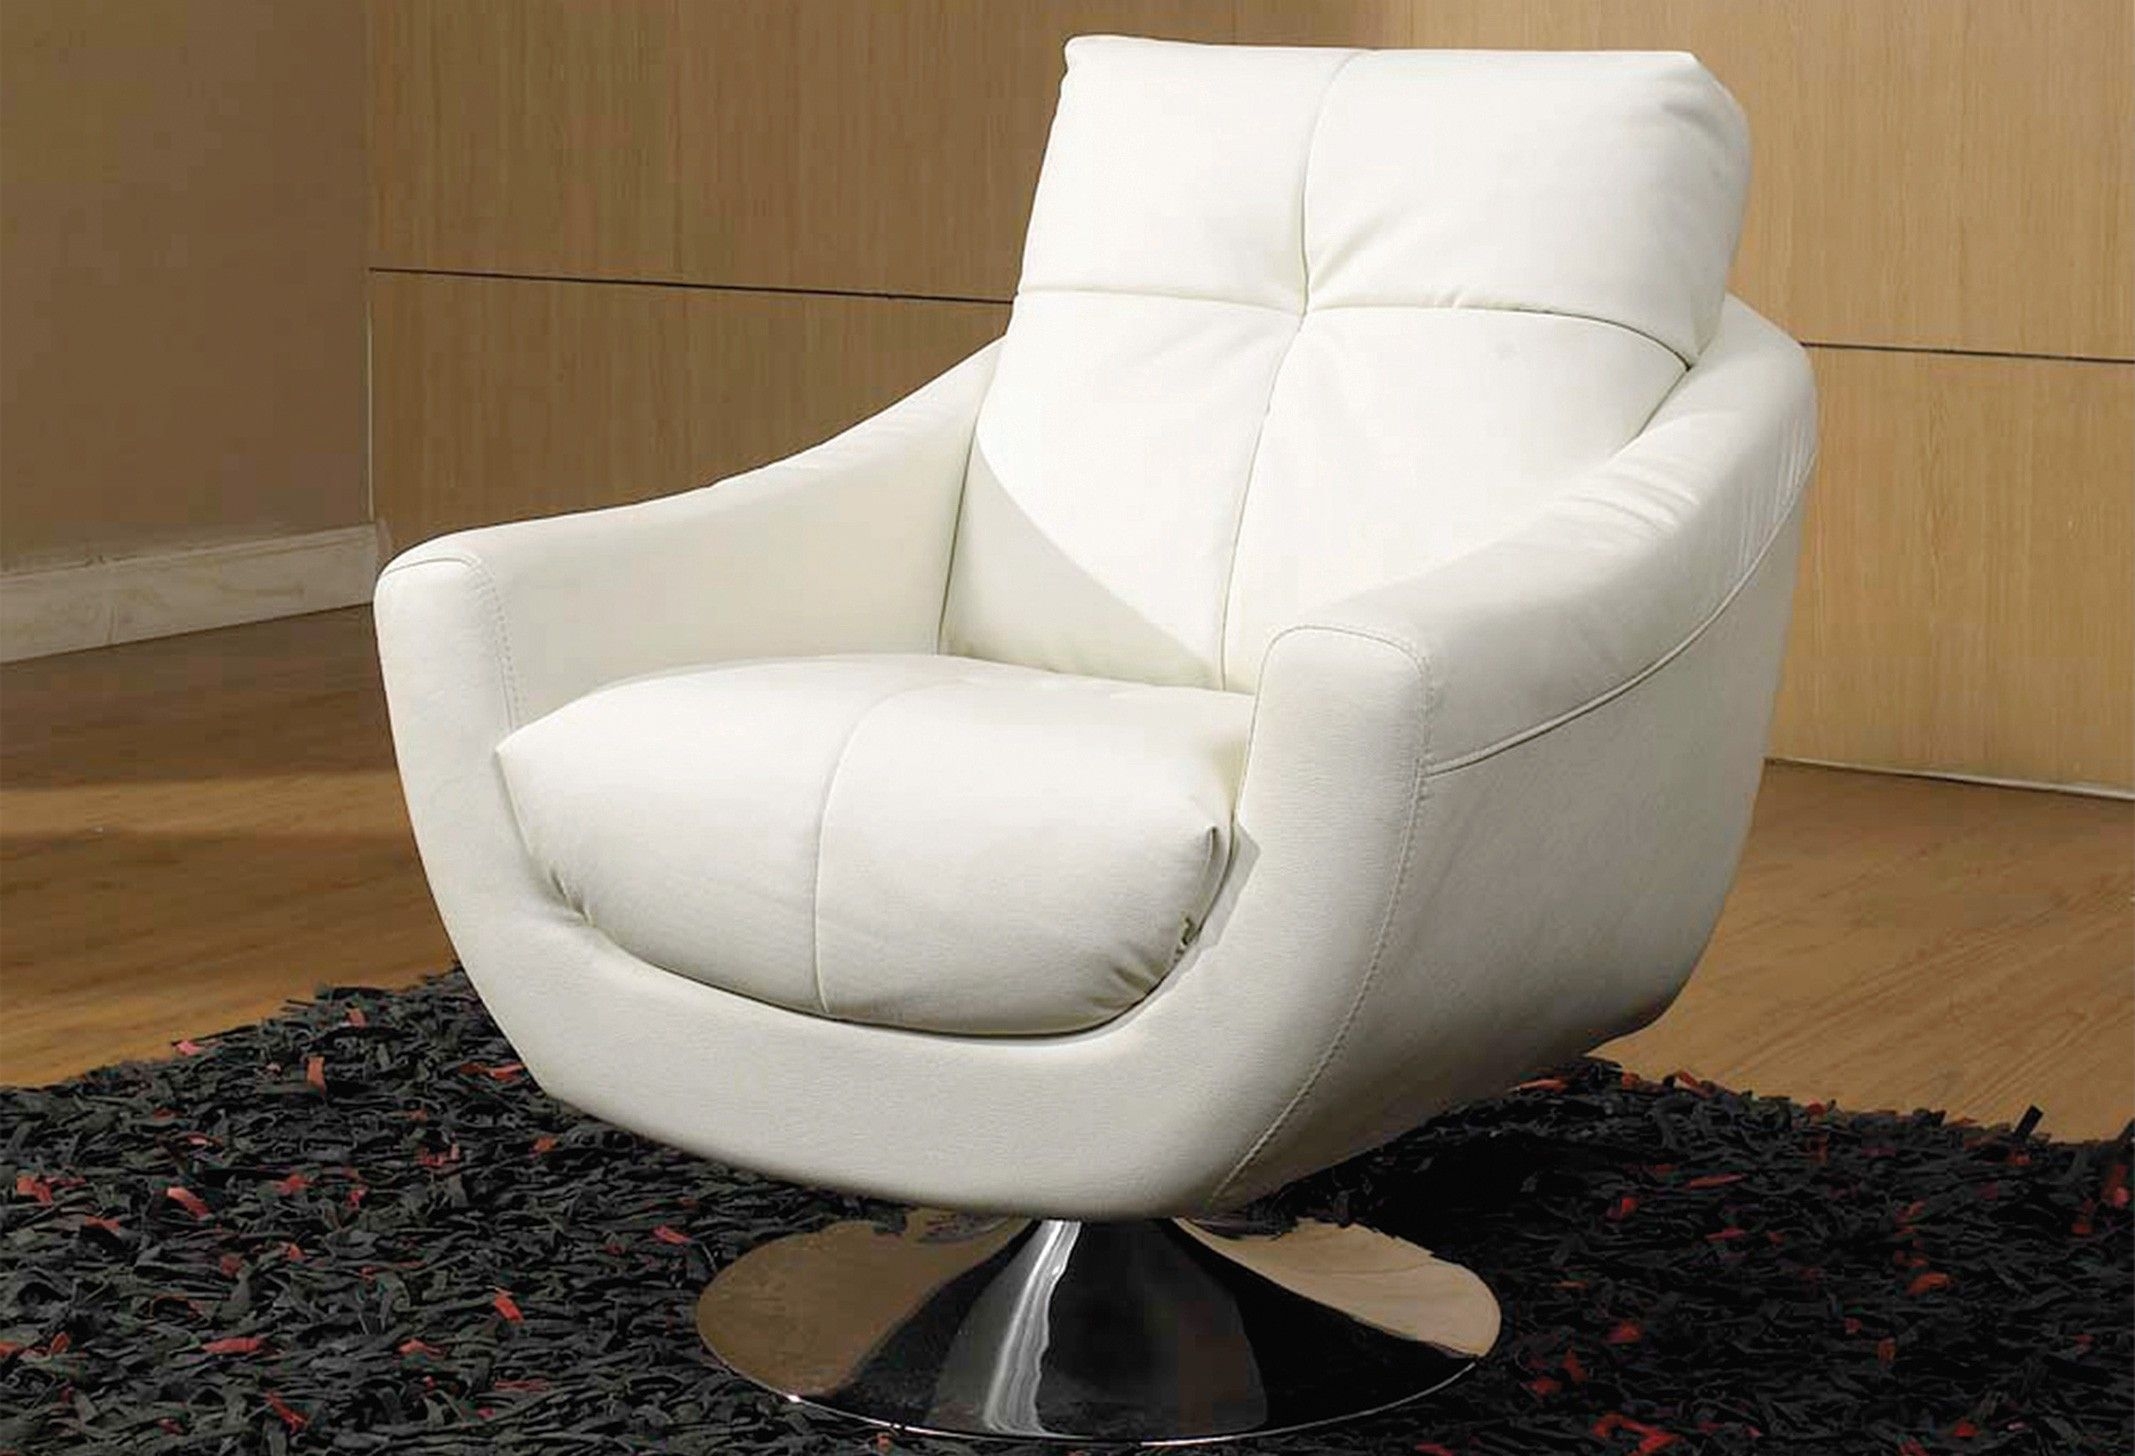 Leather swivel chairs for home office user